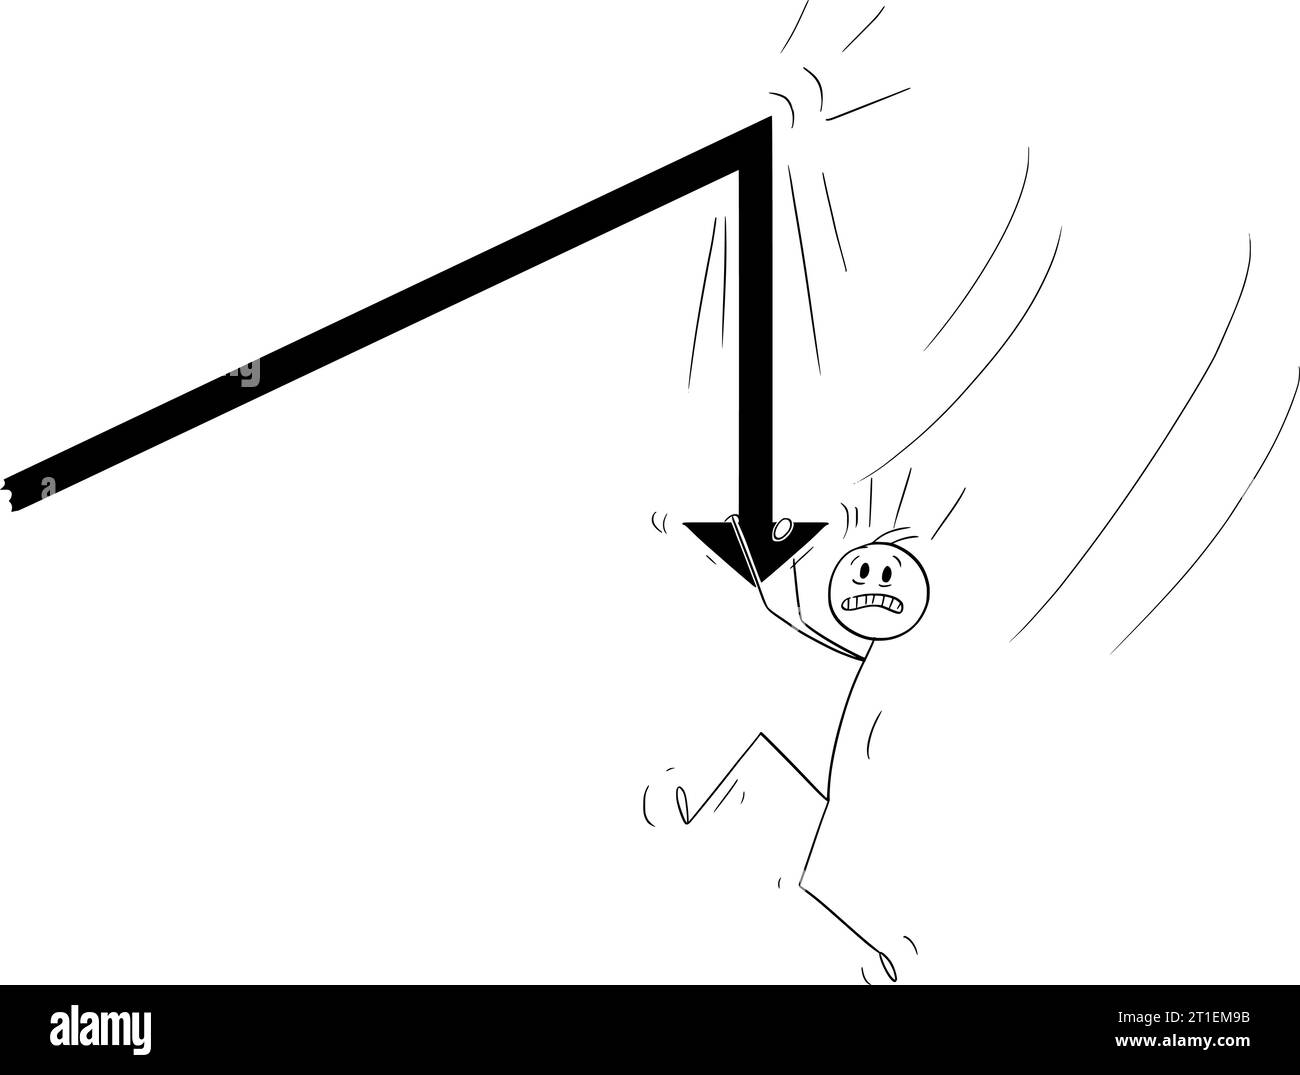 Business Rise and Fall, Vector Cartoon Stick Figure Illustration Stock Vector